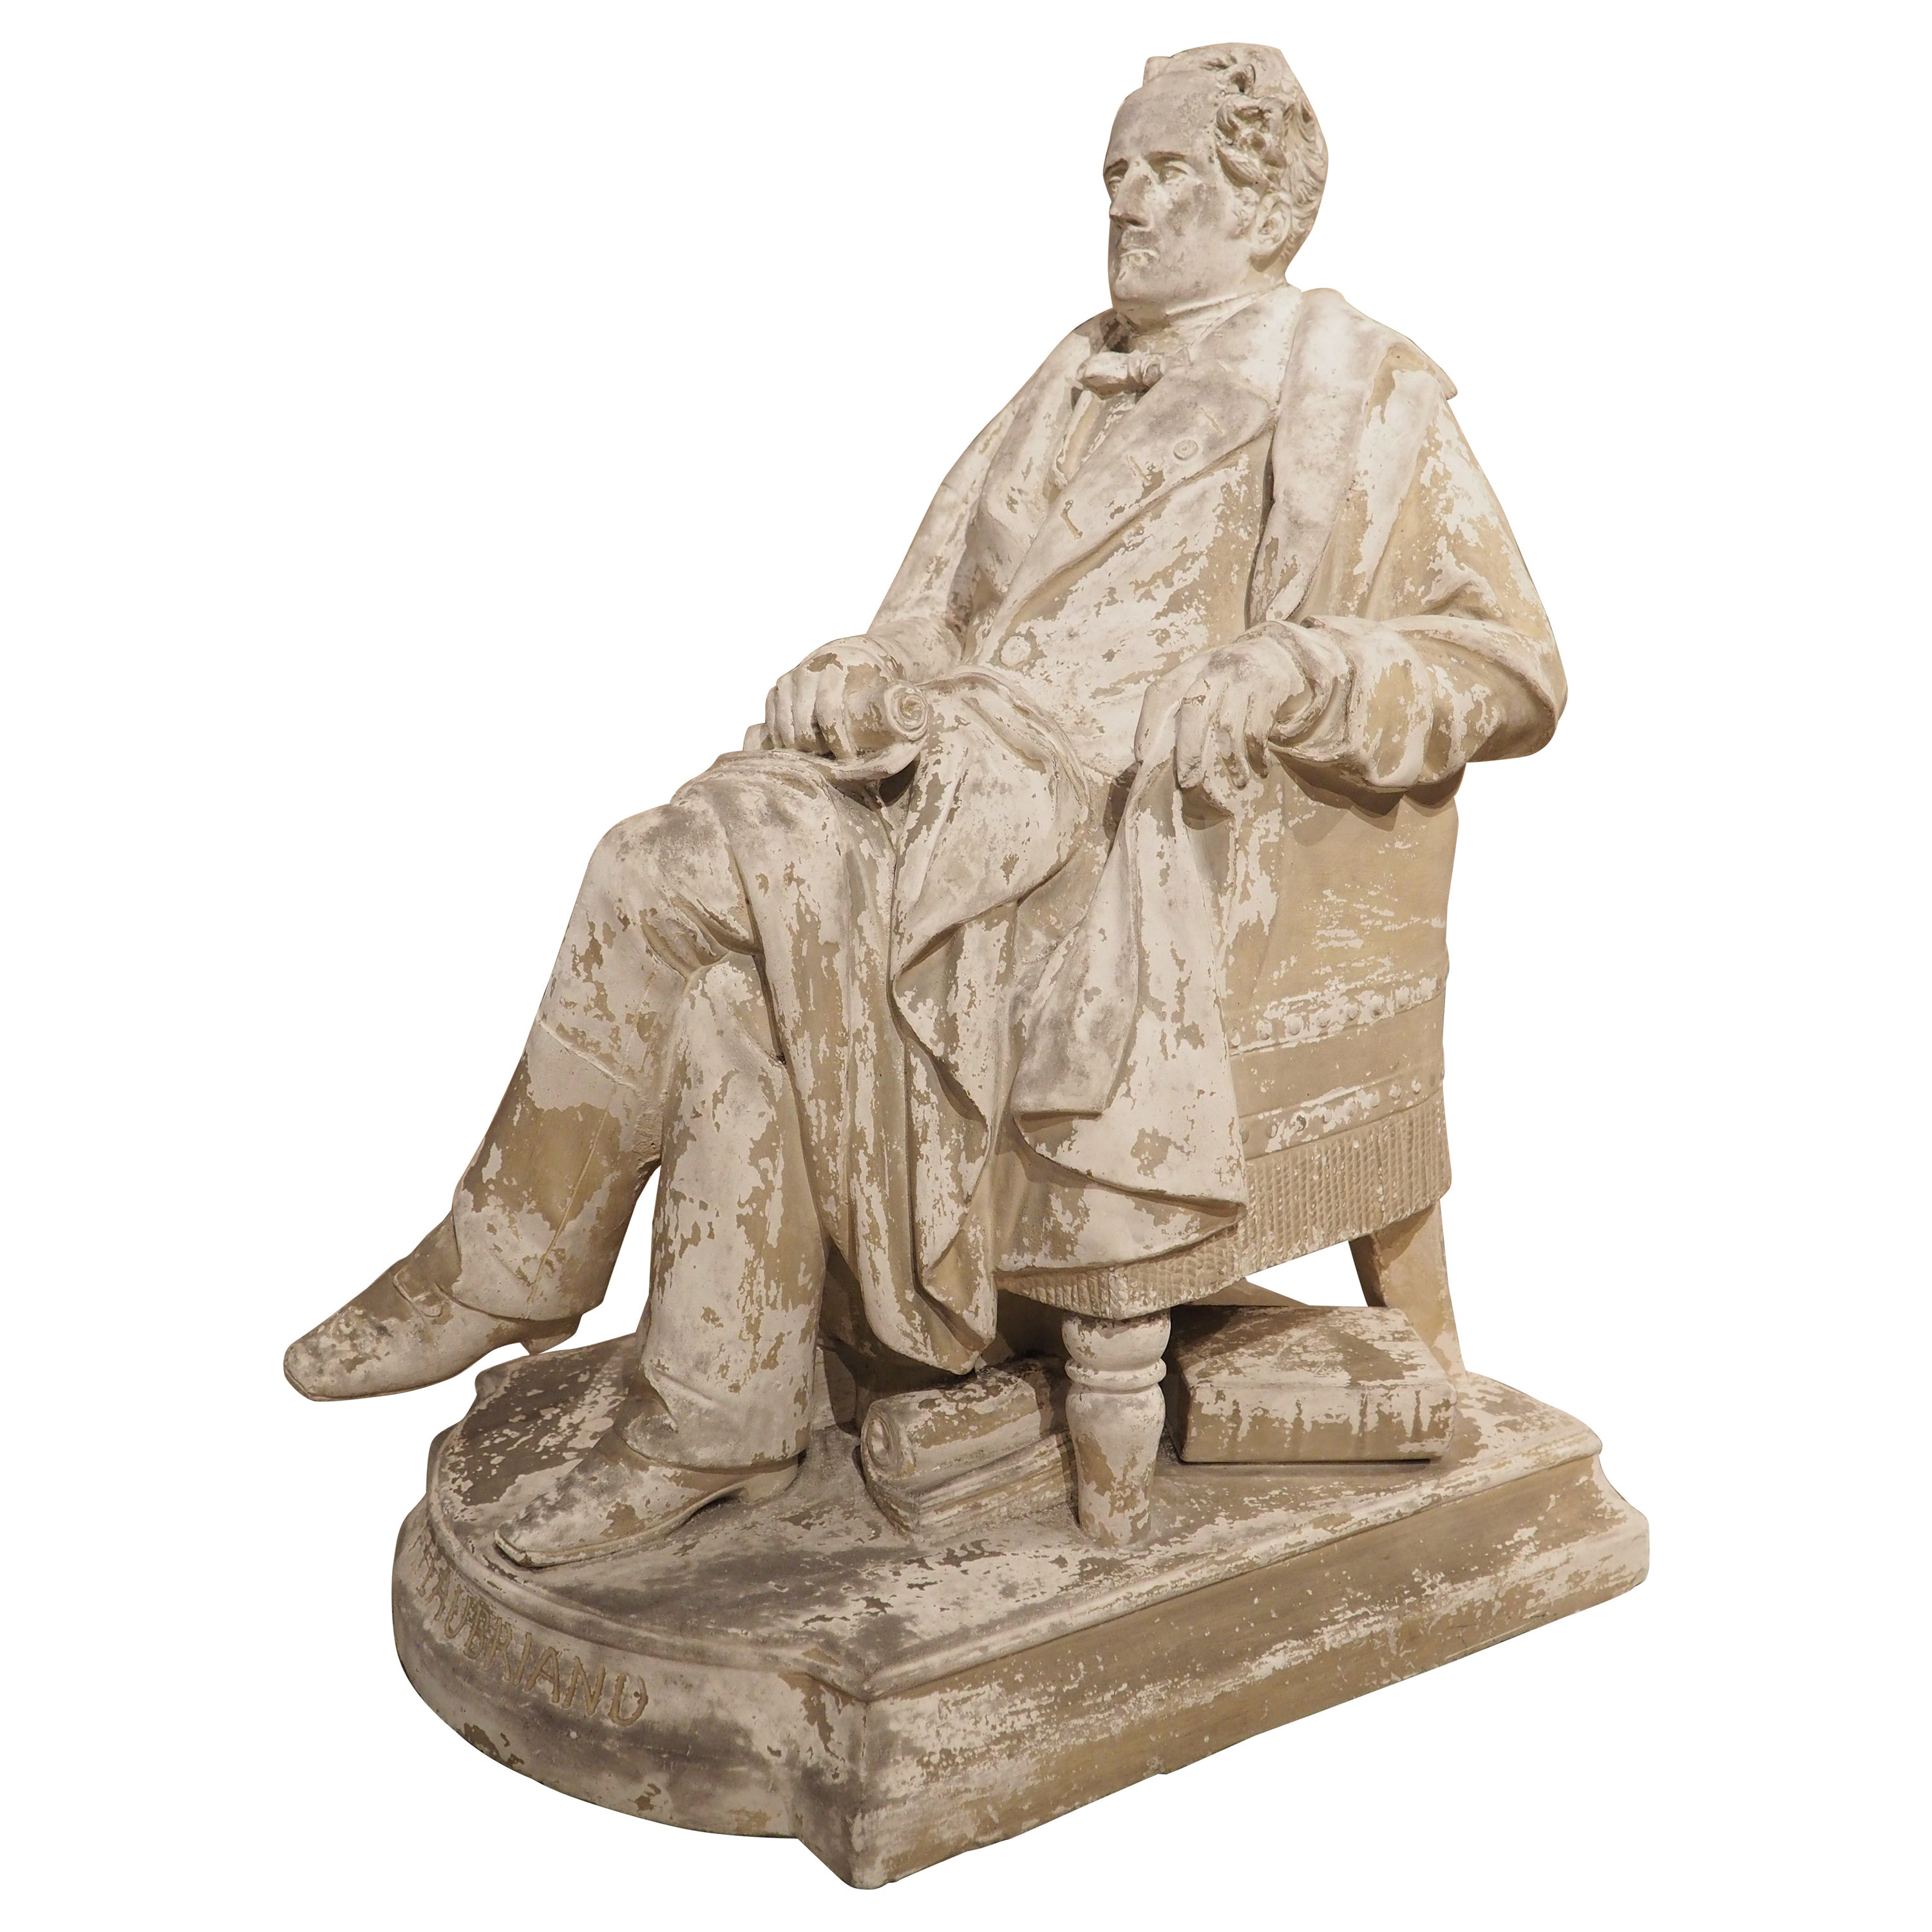 circa 1880 French Plaster Sculpture of Francois Rene De Chateaubriand